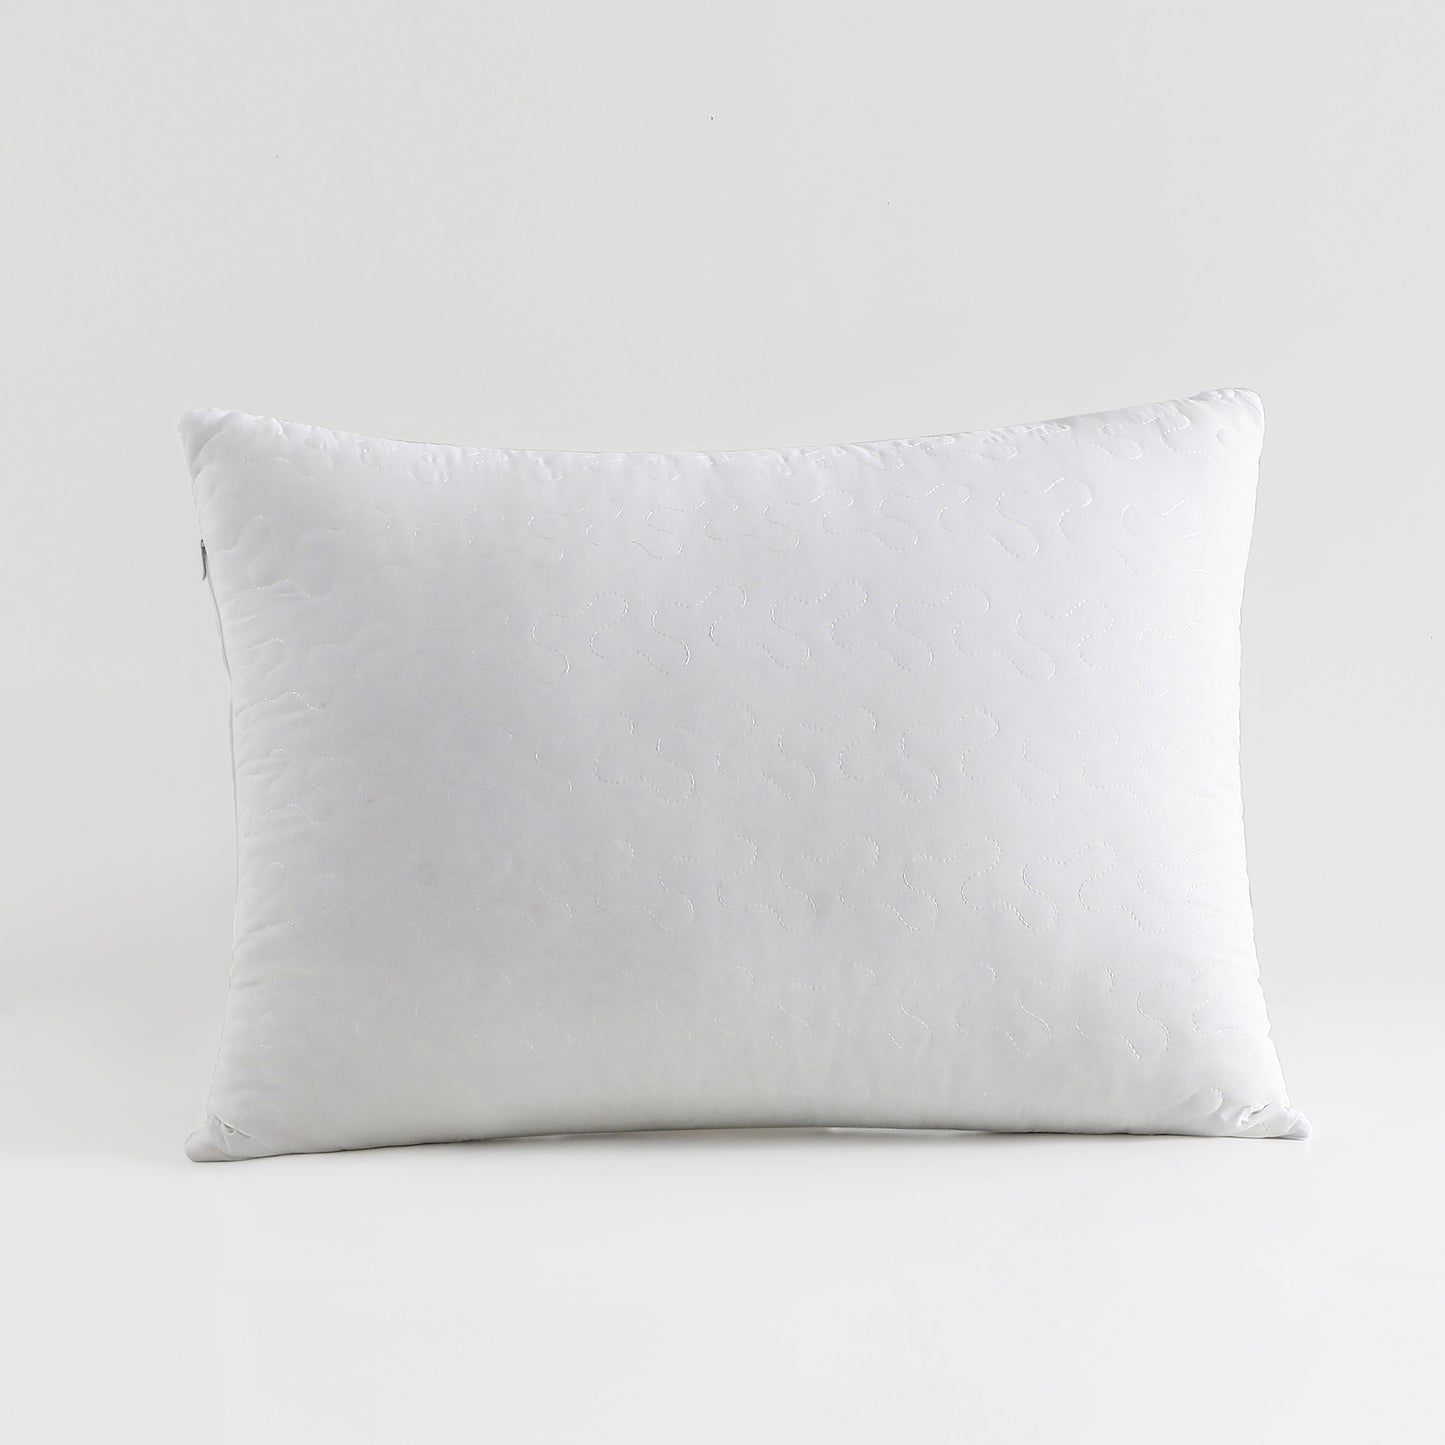 Sleepwill Extra Firm Pillow Standard/Queen/king Size for All Season,Extra Firm Stronger Support